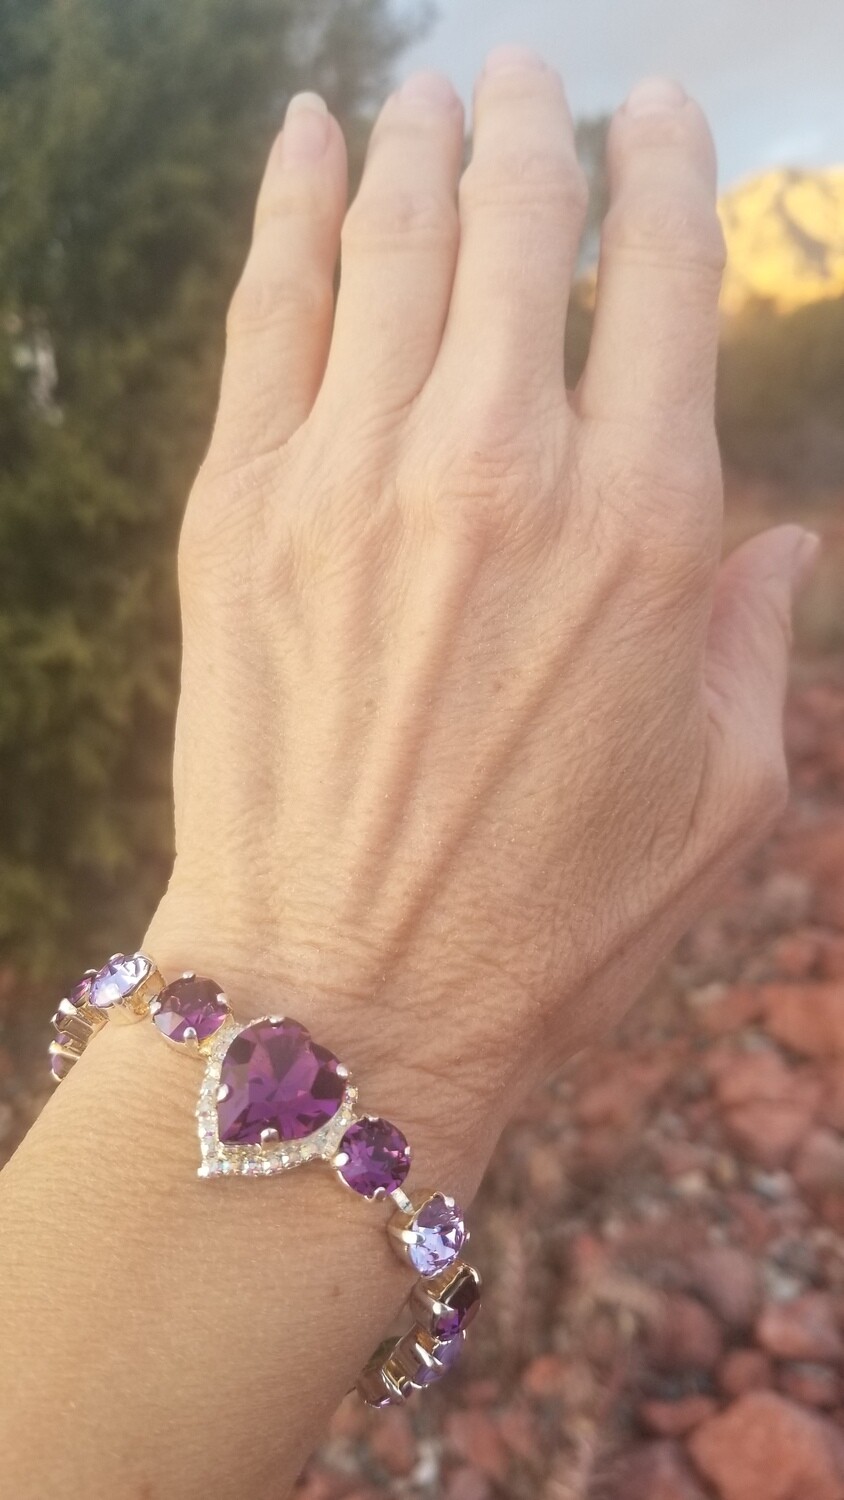 Gorgeous Violet Heart of the Rose Ray/Devic Crystal LOVE Bracelet $188/$288 Retreat Sale